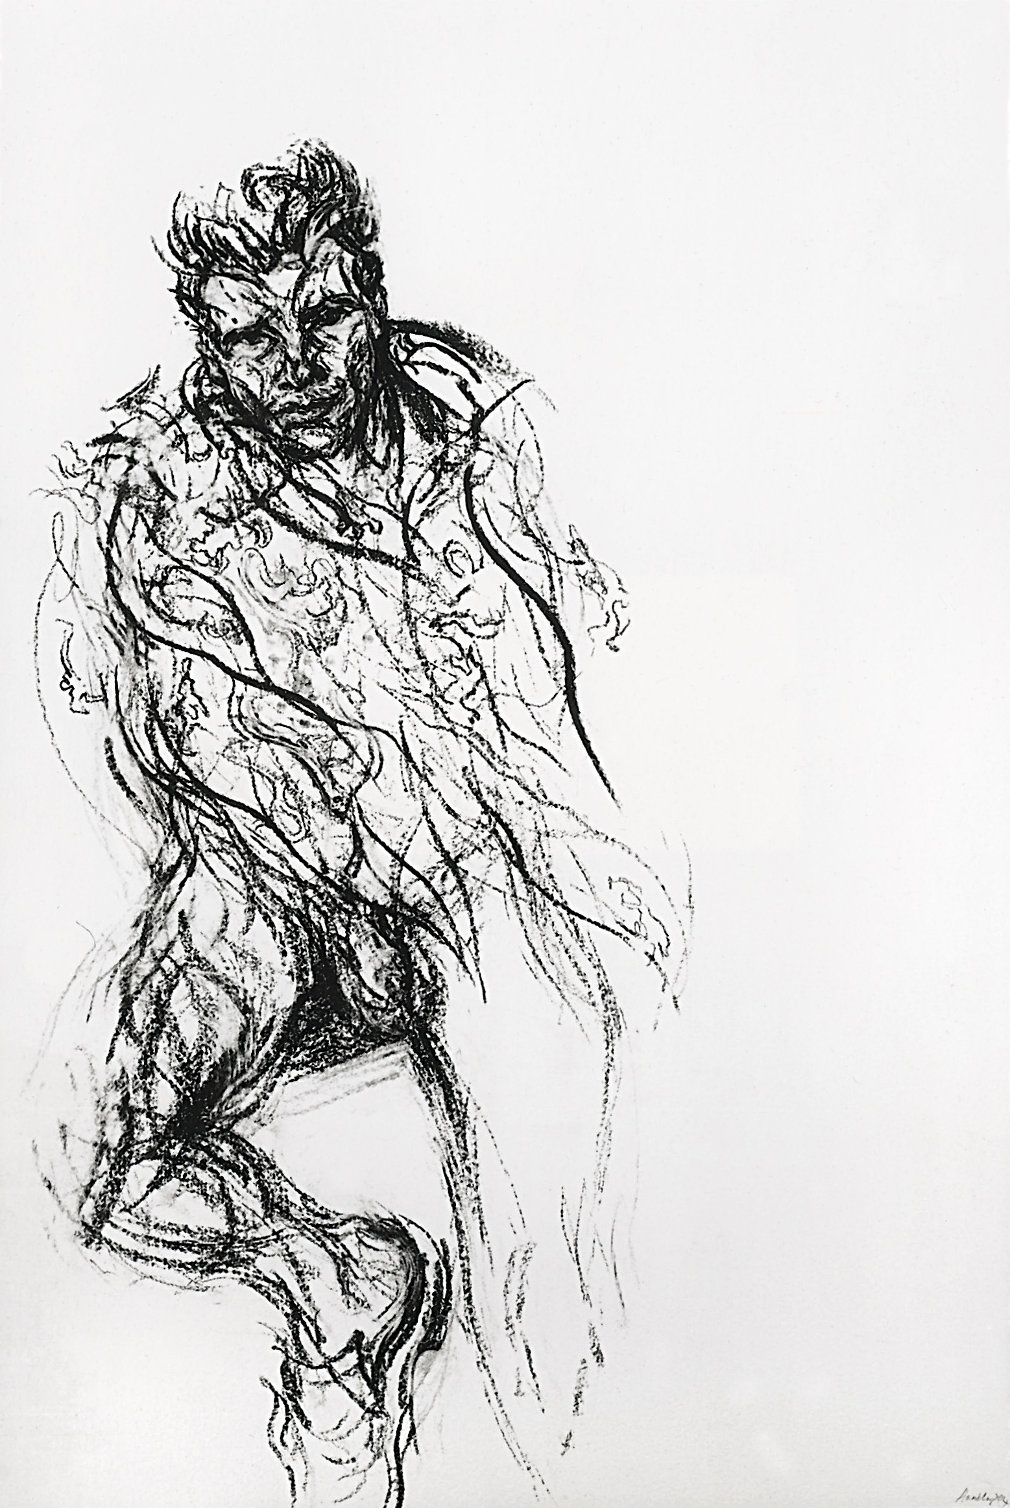 Maggi Hambling: Touch: works on paper at British Museum